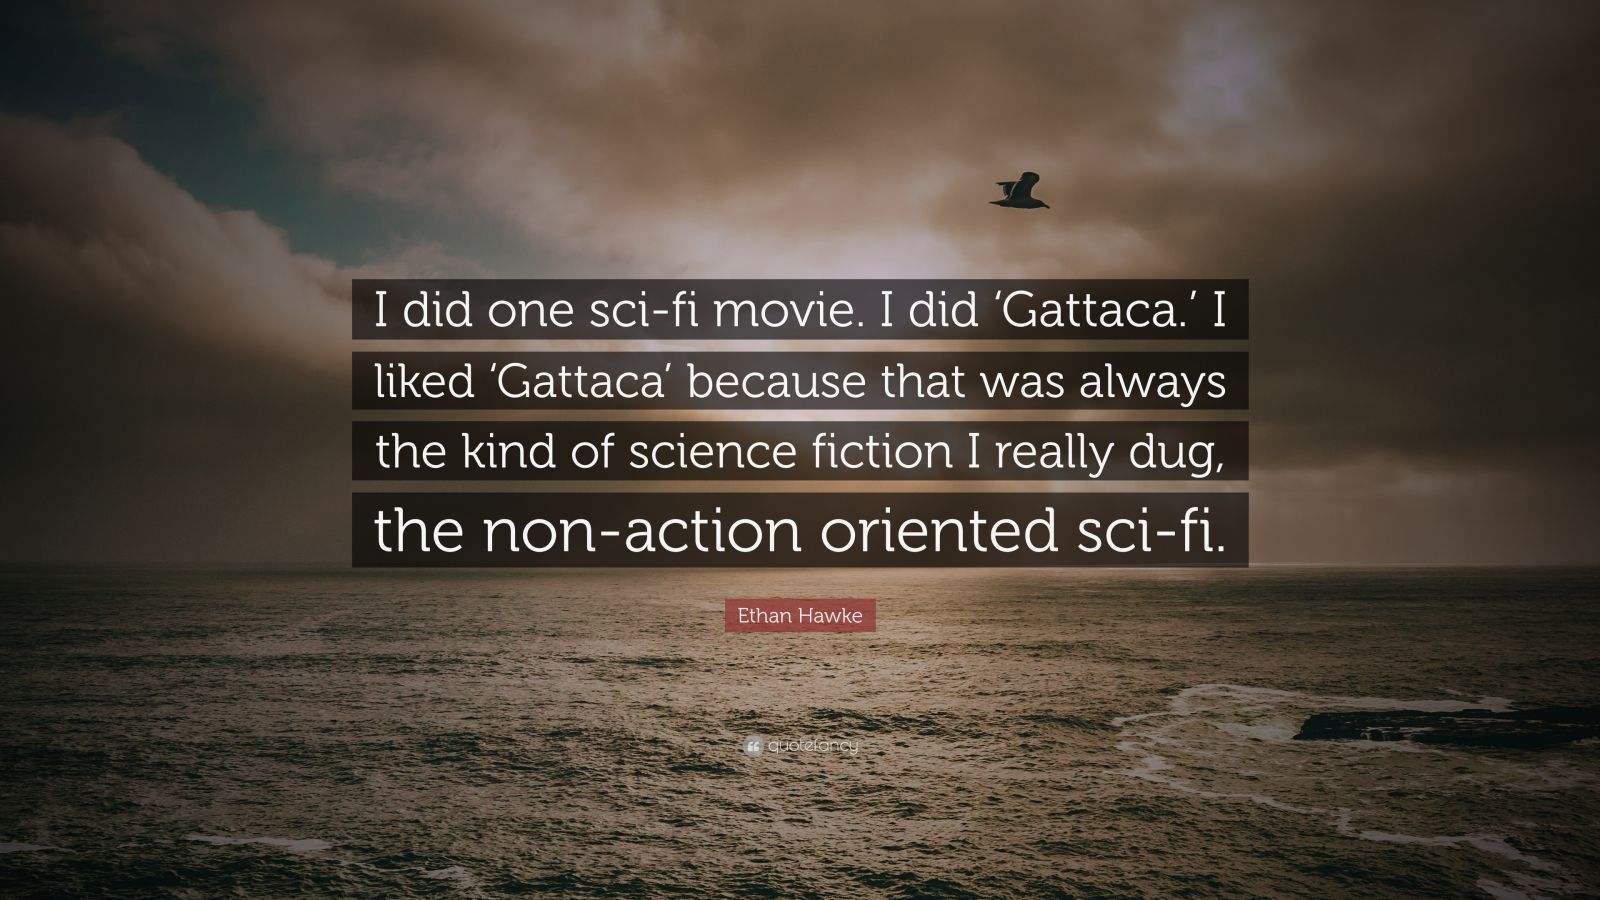 Ethan Hawke Quote: “I Did One Sci Fi Movie. I Did 'Gattaca.' I Liked ' Gattaca' Because That Was Always The Kind Of Science Fiction I Really .” (7 Wallpaper)